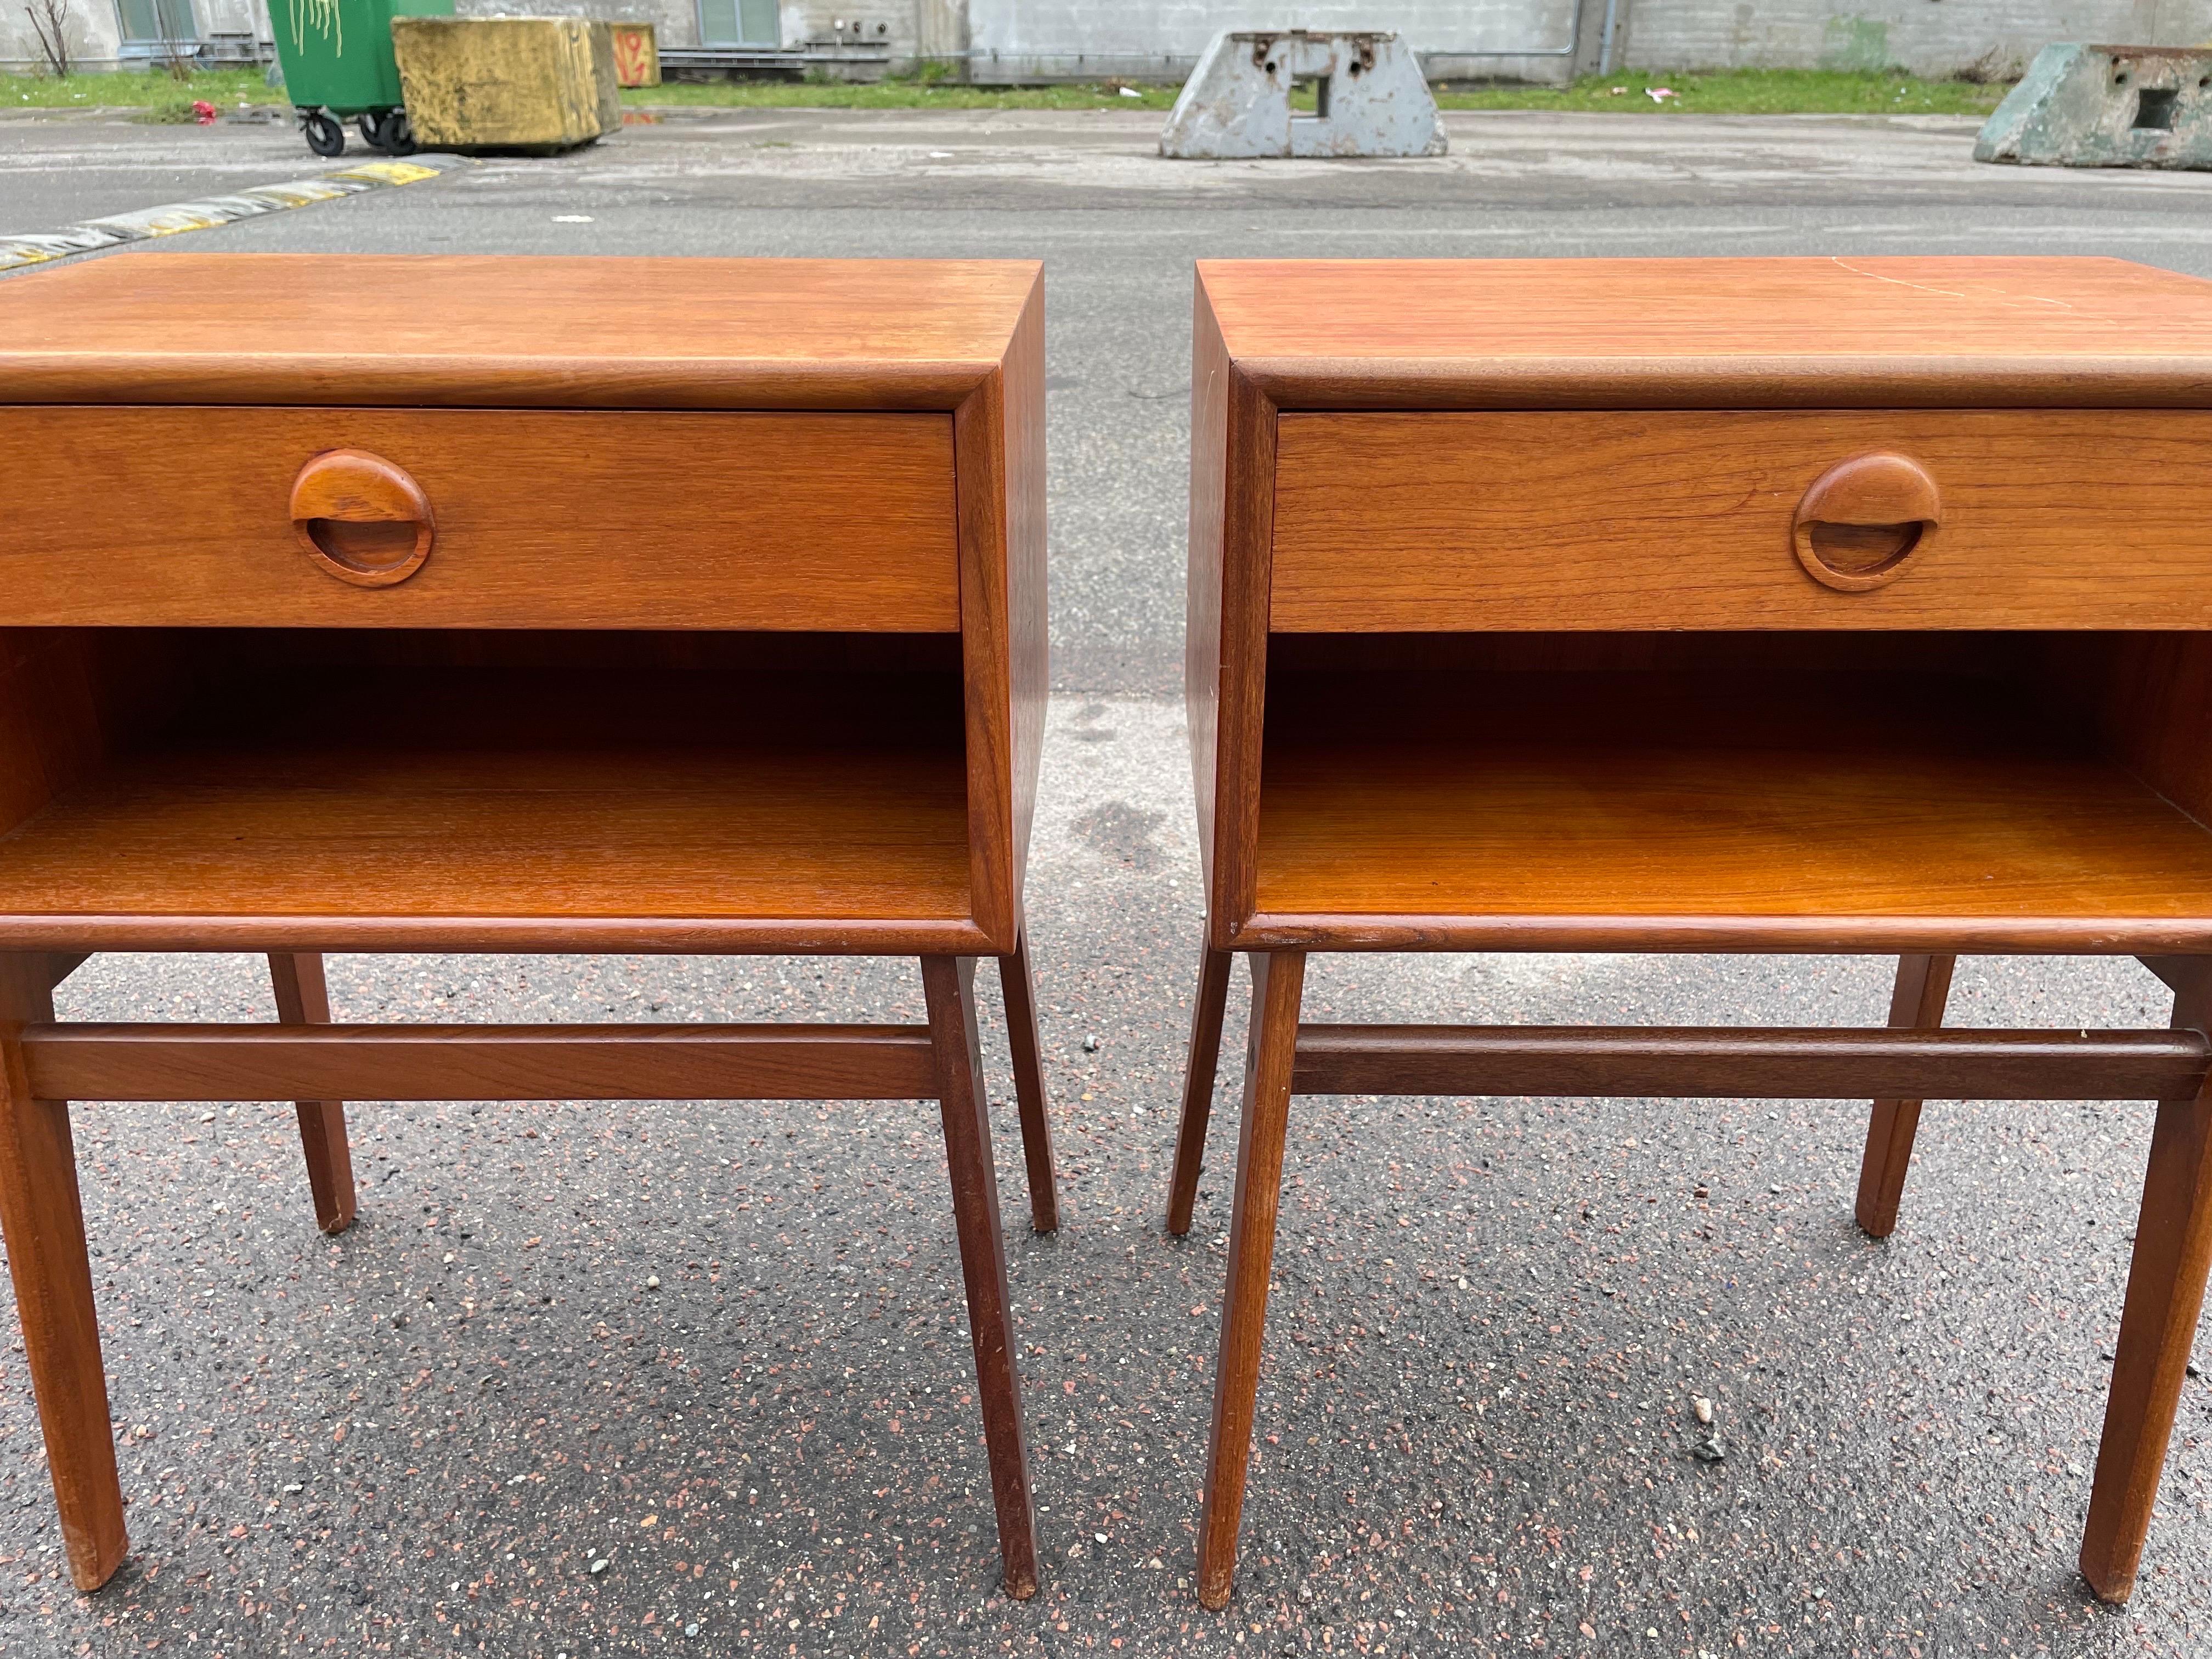 Danish Mid-Century Modern Nightstands, a perfect blend of elegance and functionality. Crafted in teak, these pieces feature sleek lines and are embodying the timeless appeal of mid-century design. The minimalist yet stylish drawer handles add a